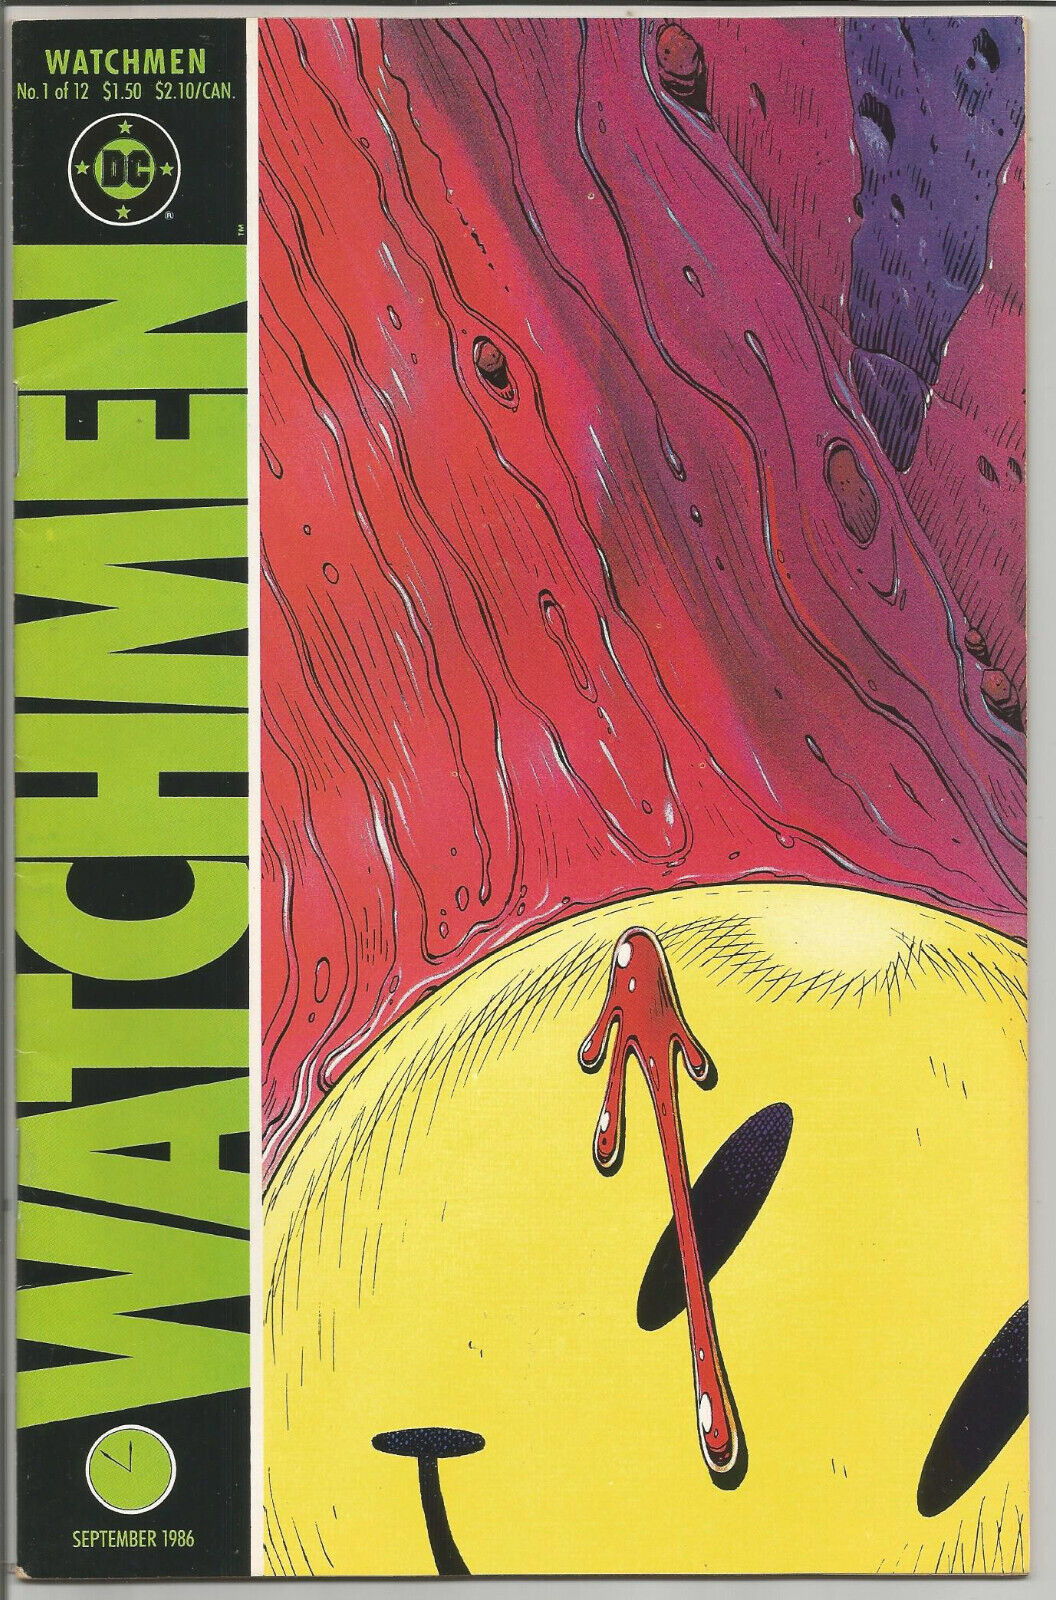 WATCHMEN #1 (of 12) 1986, DC/Direct Dave Gibbons Very Fine+ 